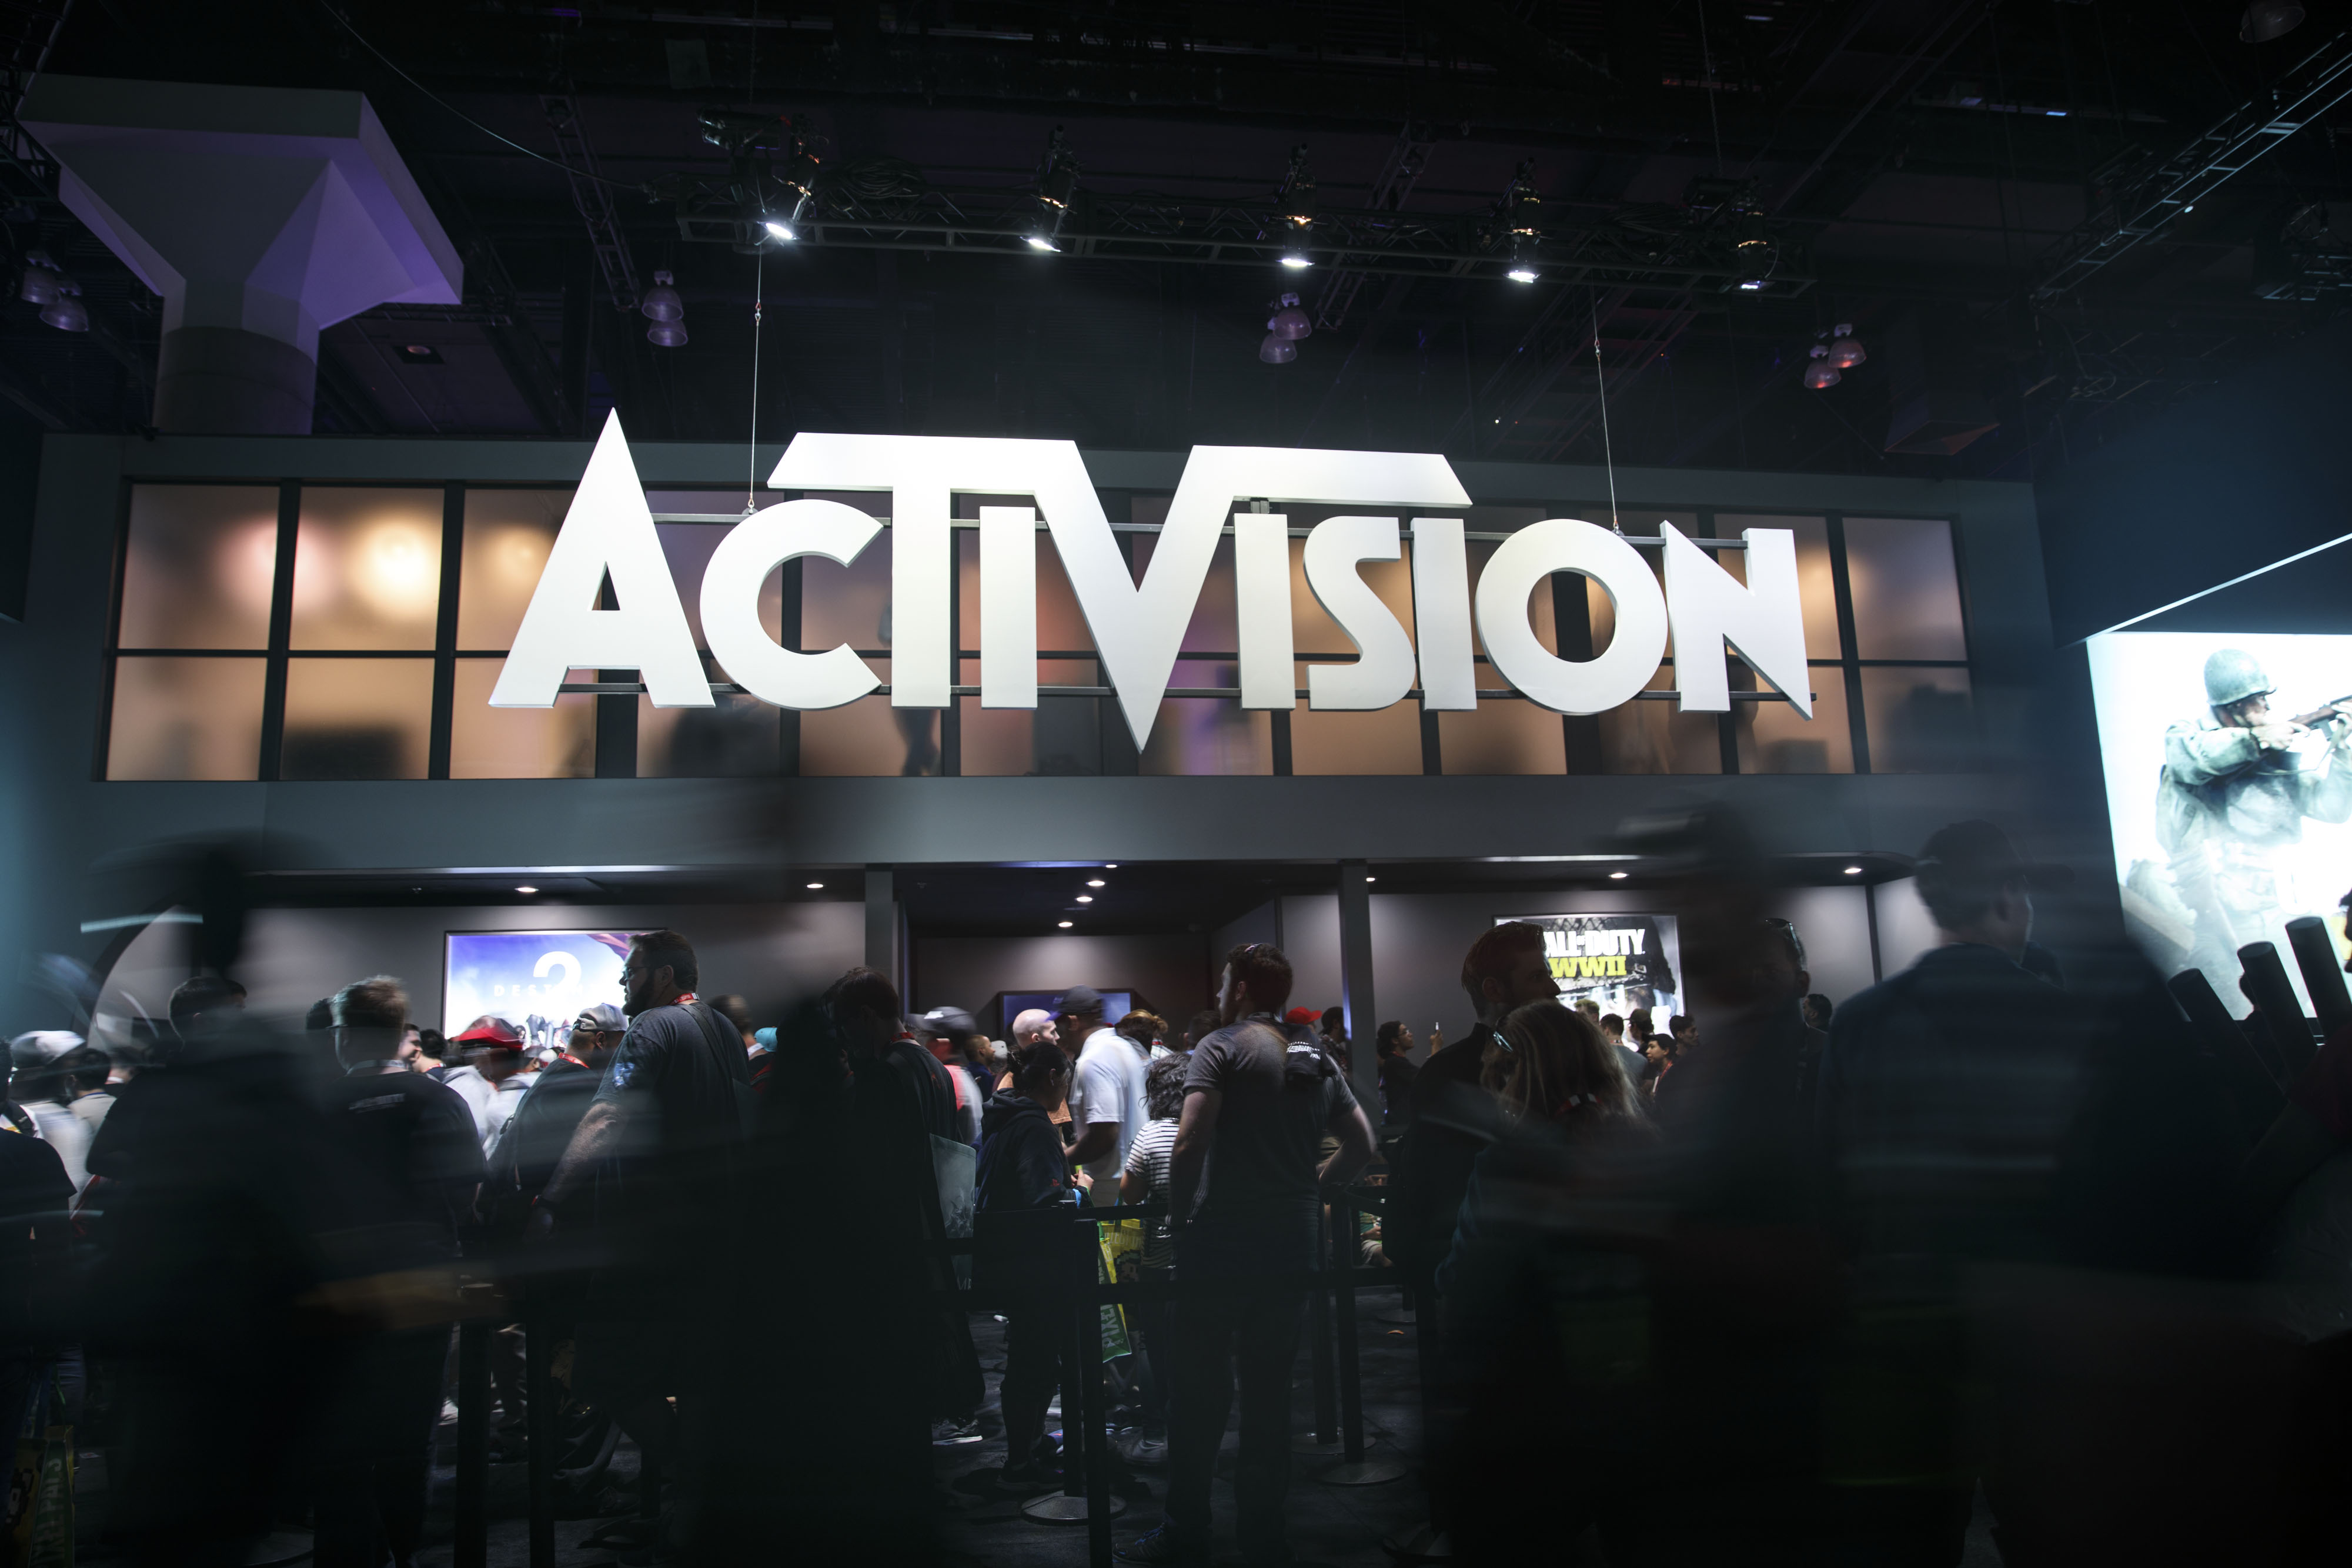 Microsoft's acquisition of Activision is essentially a done deal